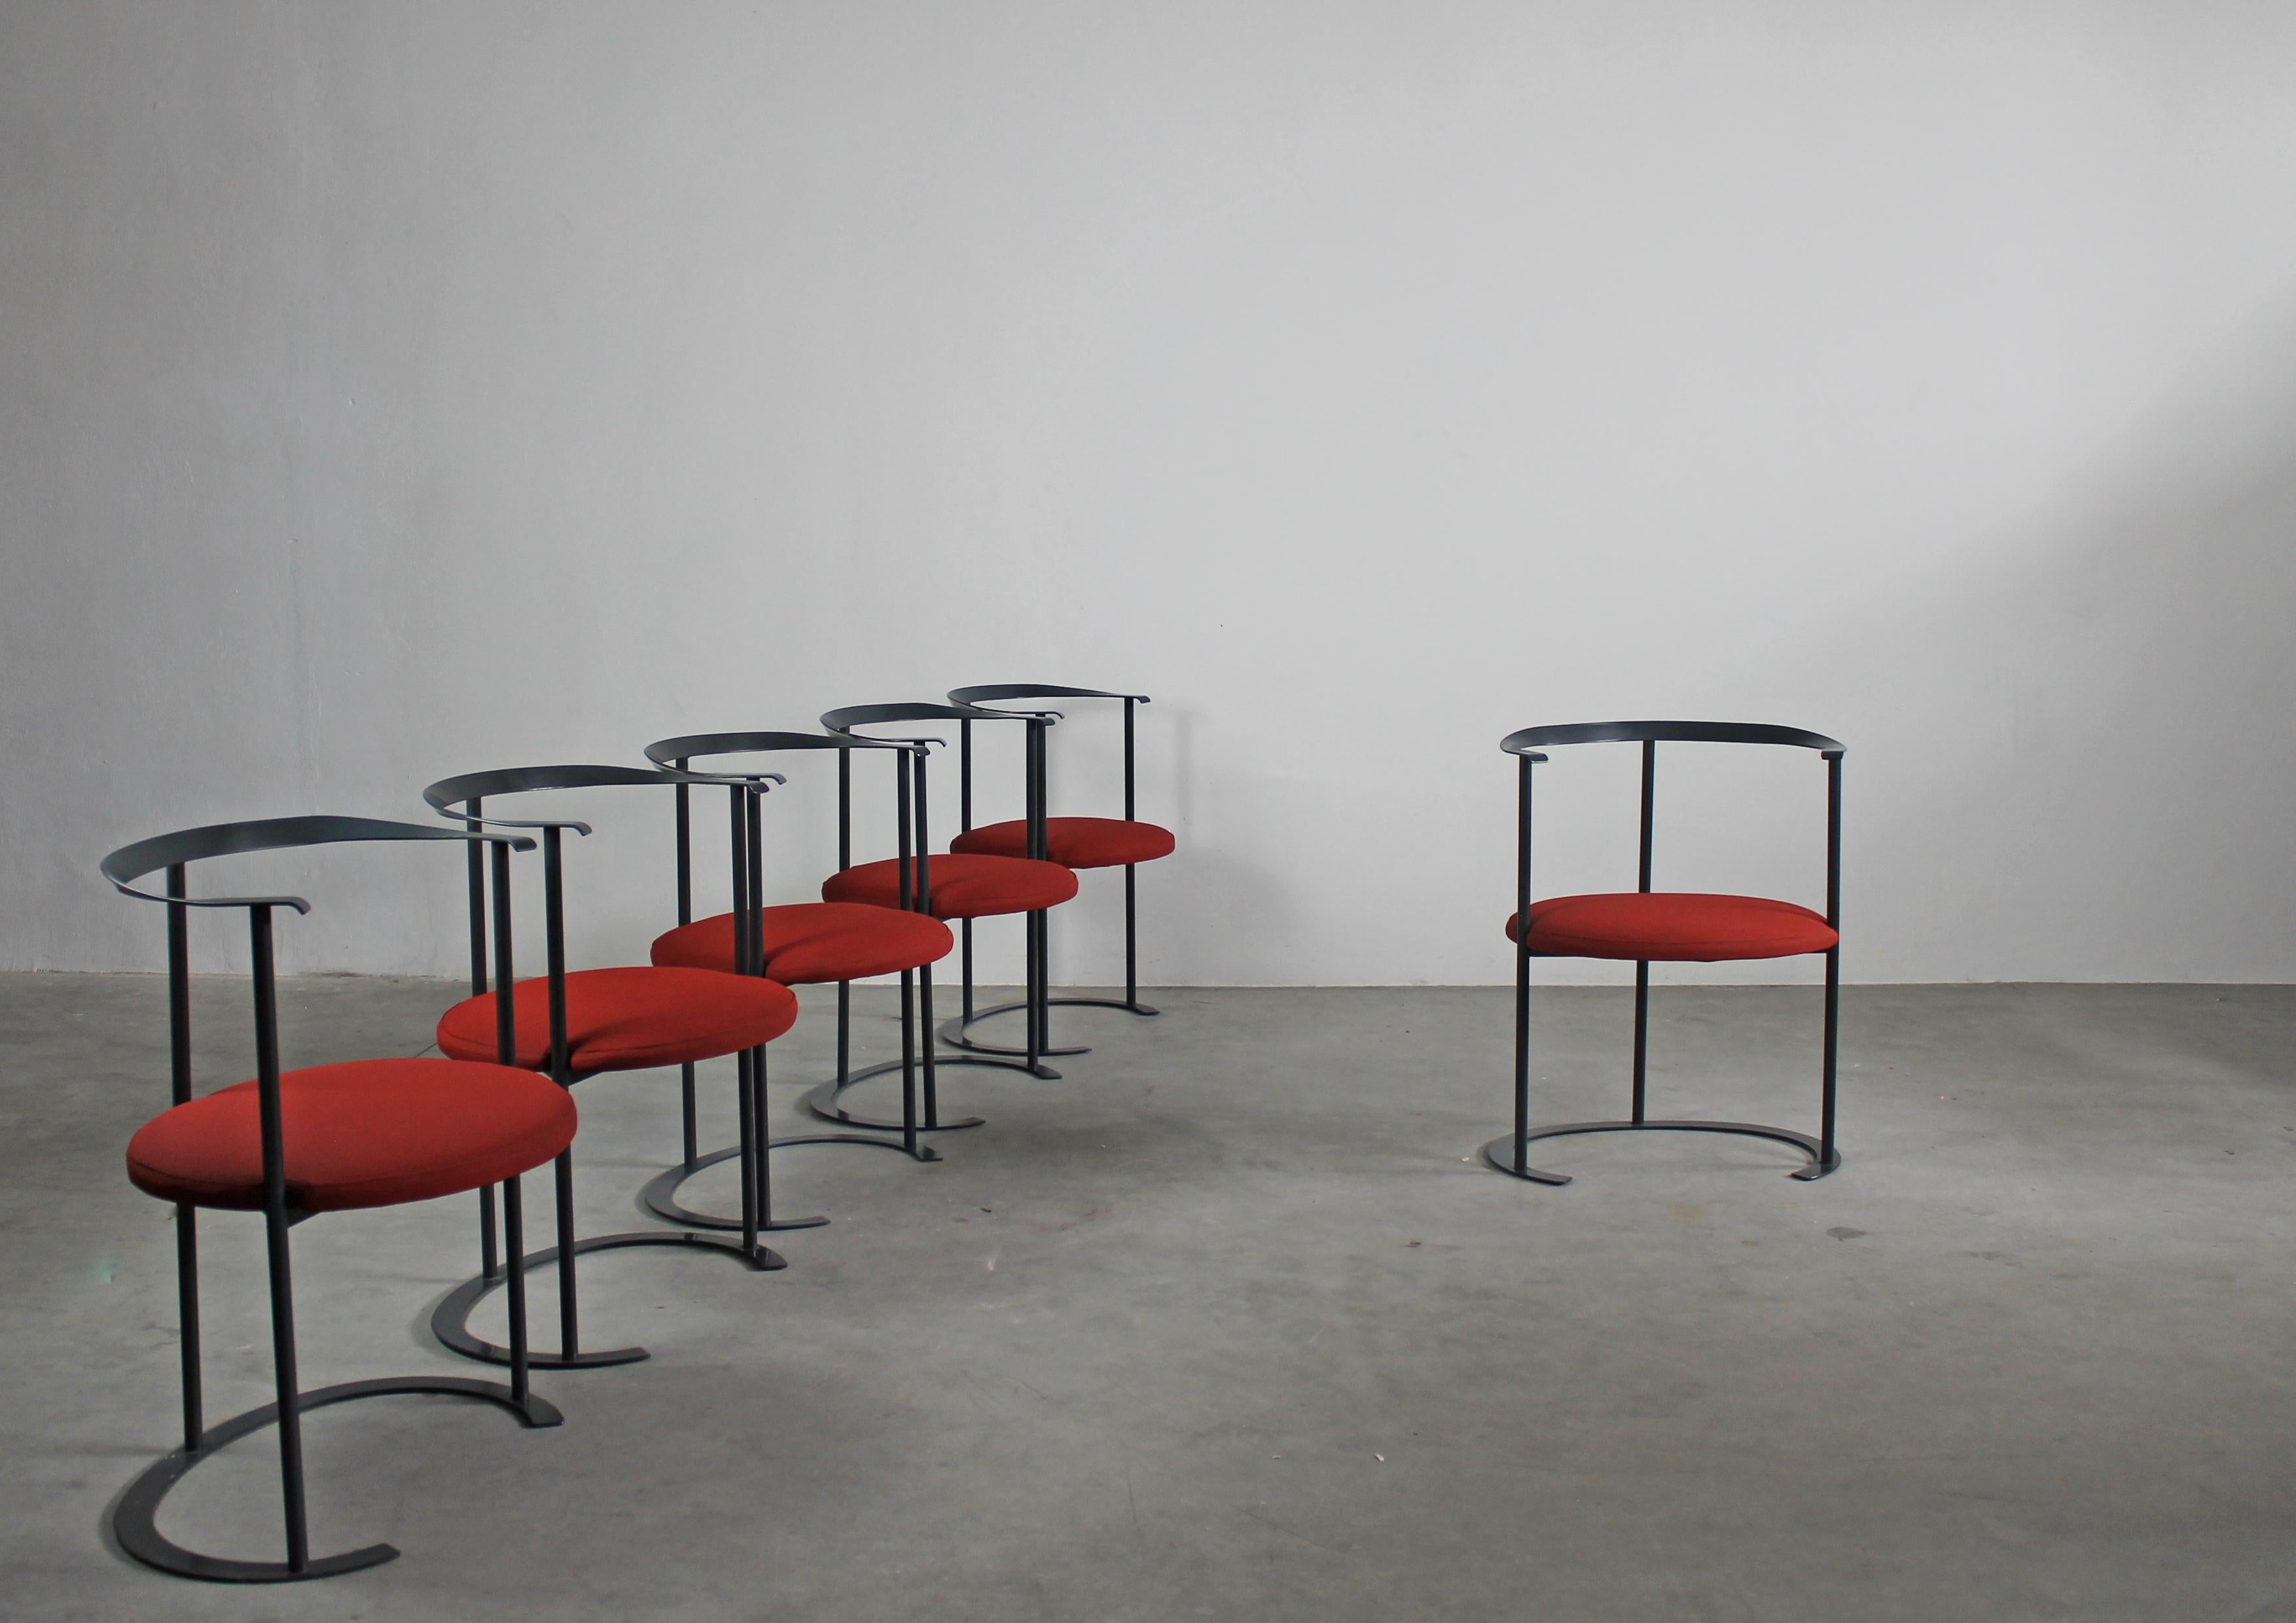 Set of six Catilina chairs with frame in painted steel, seat top in multi-layered wood, and upholstery-shaped polyurethane cushions covered with red fabric. This iconic seat was designed by Luigi Caccia Dominioni, and produced by Azucena since 1958.